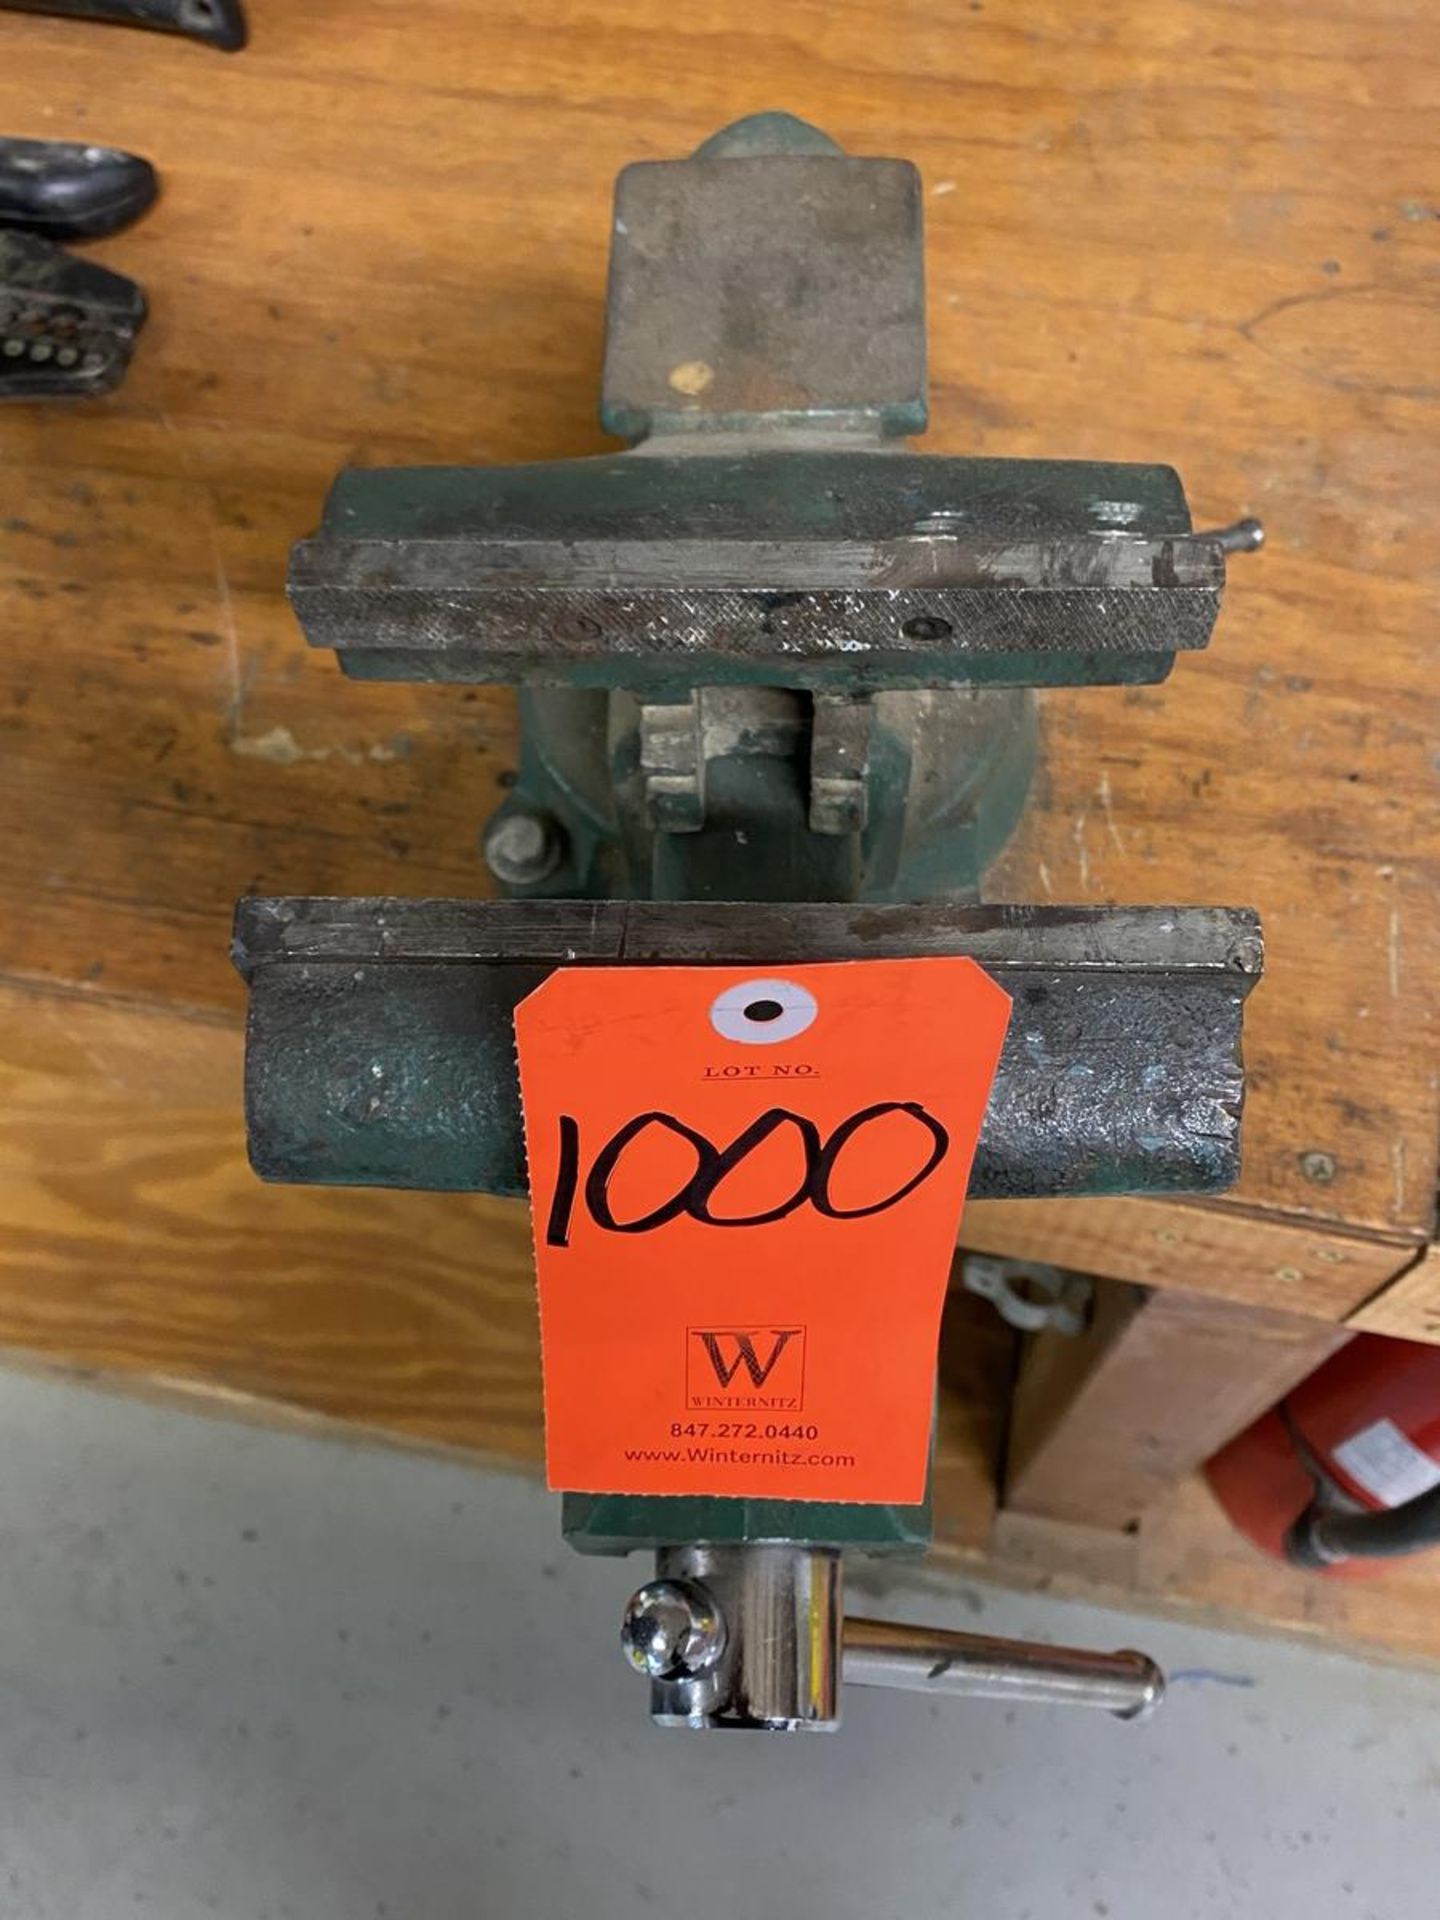 Master Force 6 in. Bench Vise - (Located In: Bedford Park, IL) - Image 2 of 2